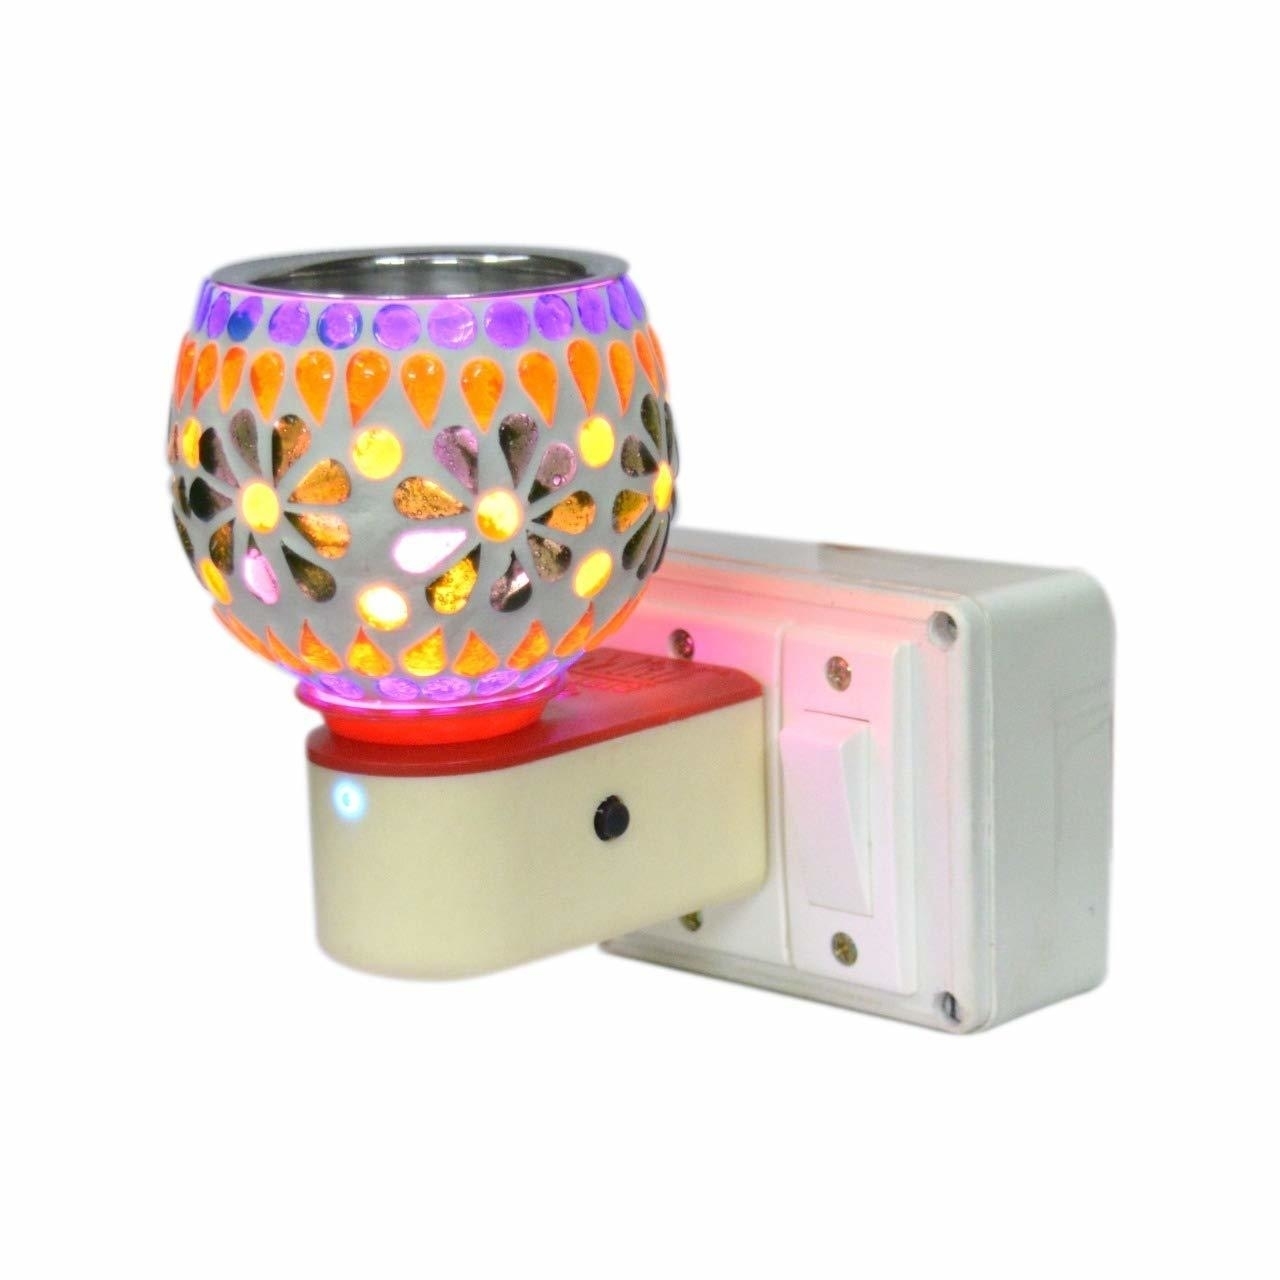 Ceramic Electric Dhoop Dani Burner Machine For Bactria Free Home, Office